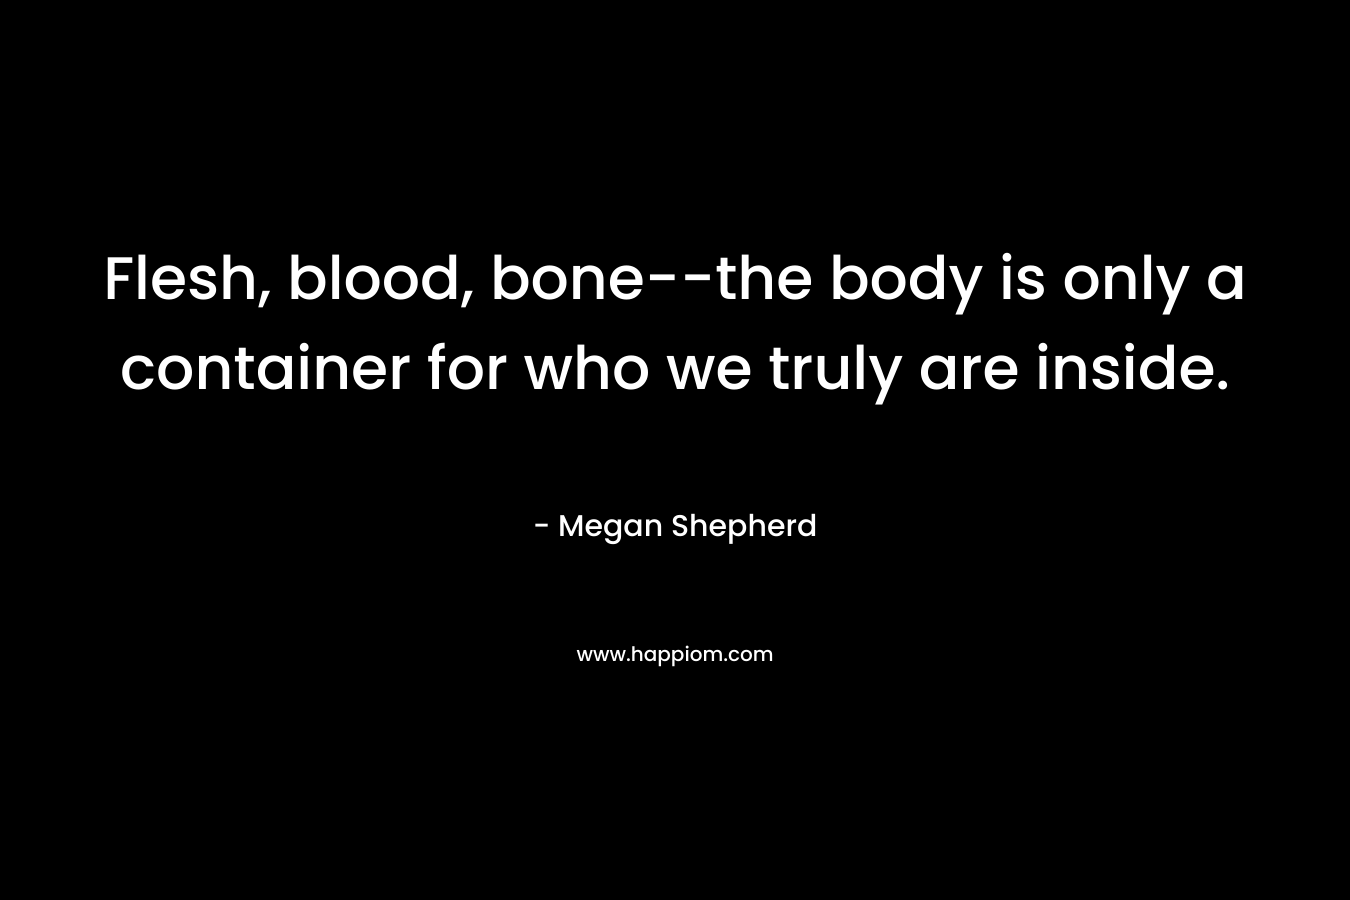 Flesh, blood, bone--the body is only a container for who we truly are inside.